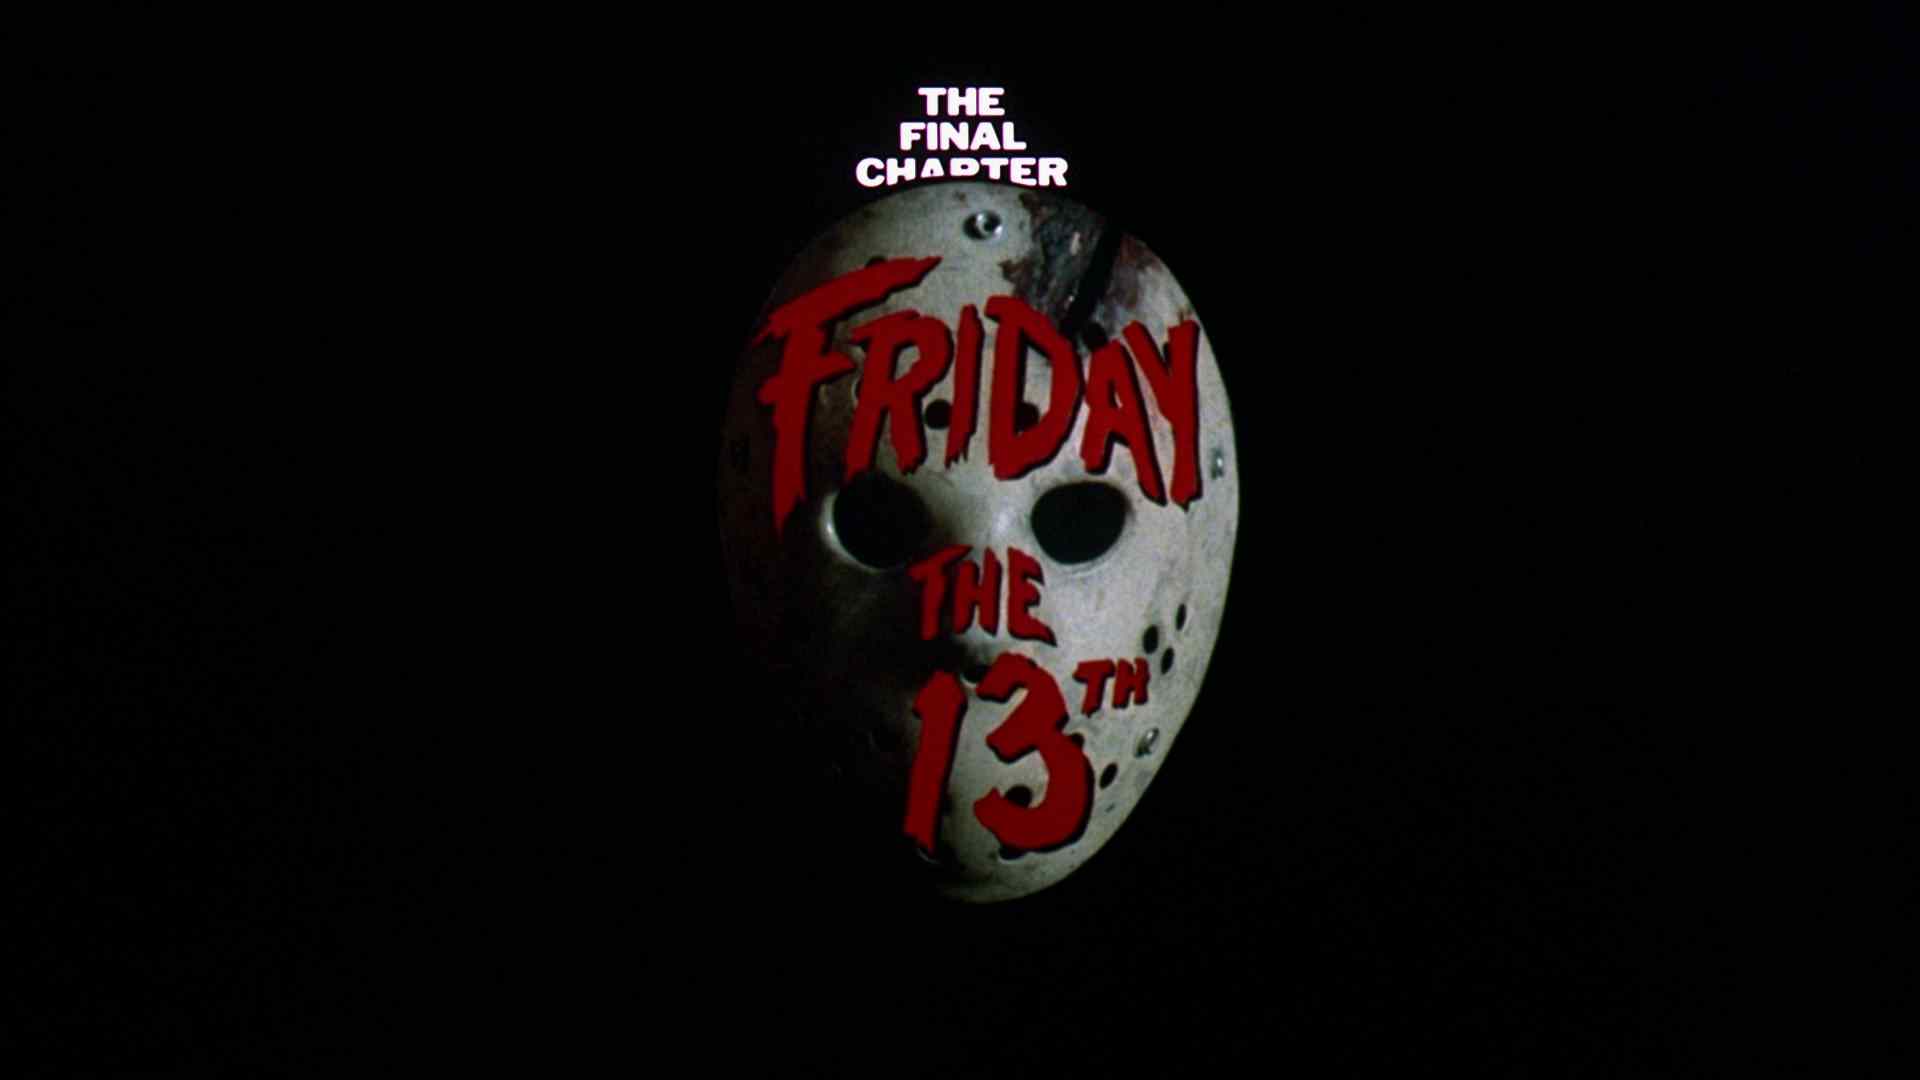 Title card in Friday the 13th - The Final Chapter